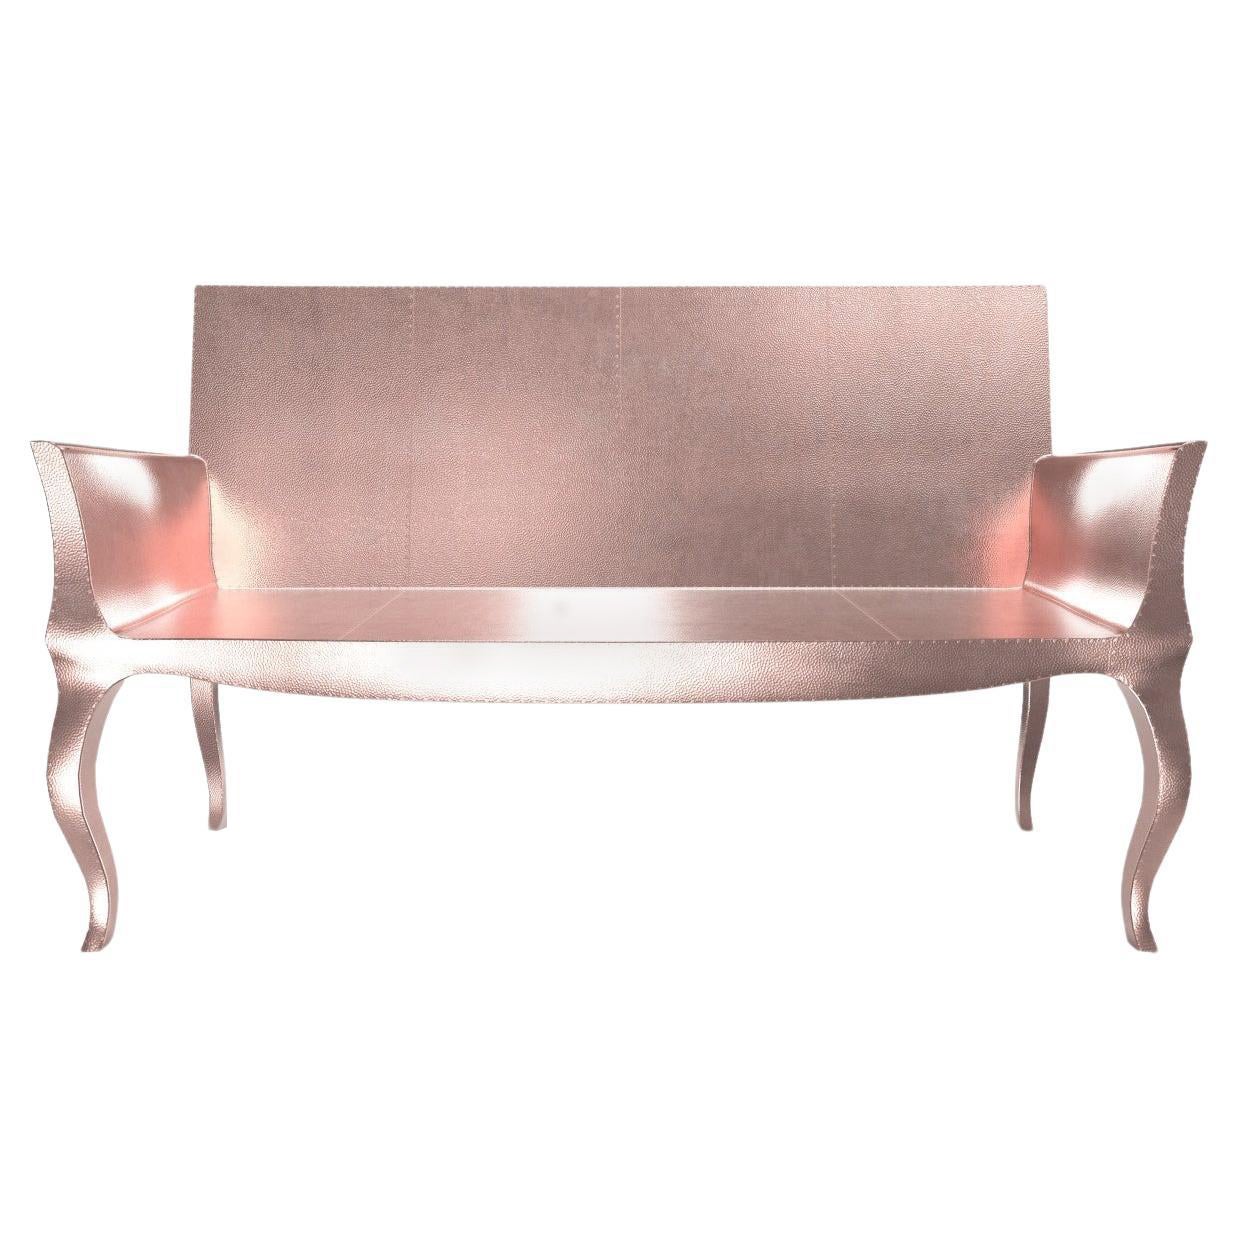 Louise Settee Art Deco Daybeds in Mid. Hammered Copper by Paul Mathieu For Sale